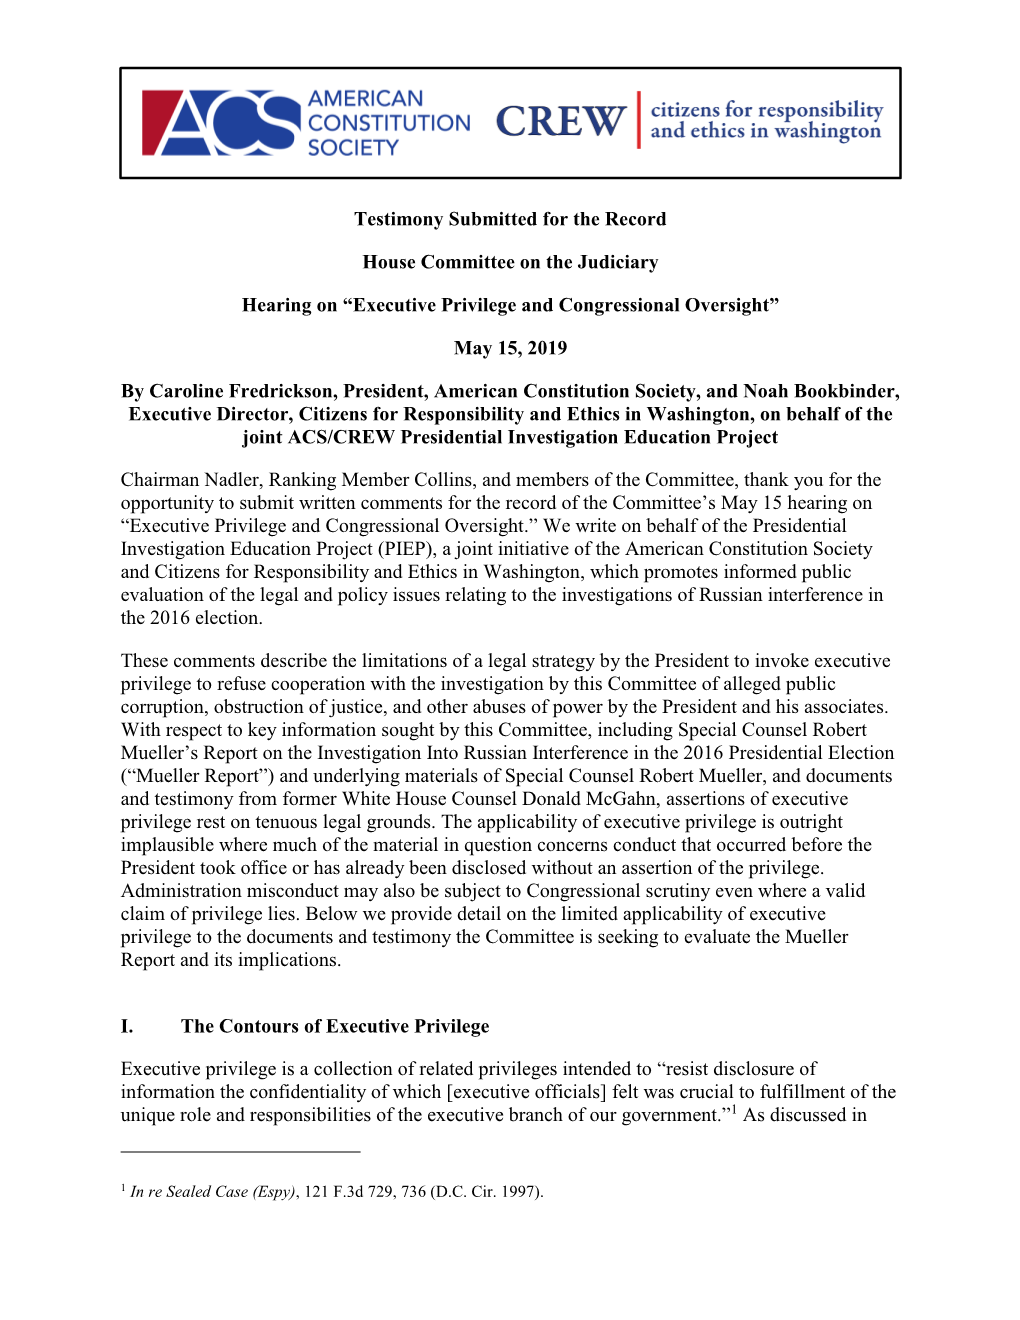 Testimony Submitted for the Record House Committee on the Judiciary Hearing on “Executive Privilege and Congressional Oversigh